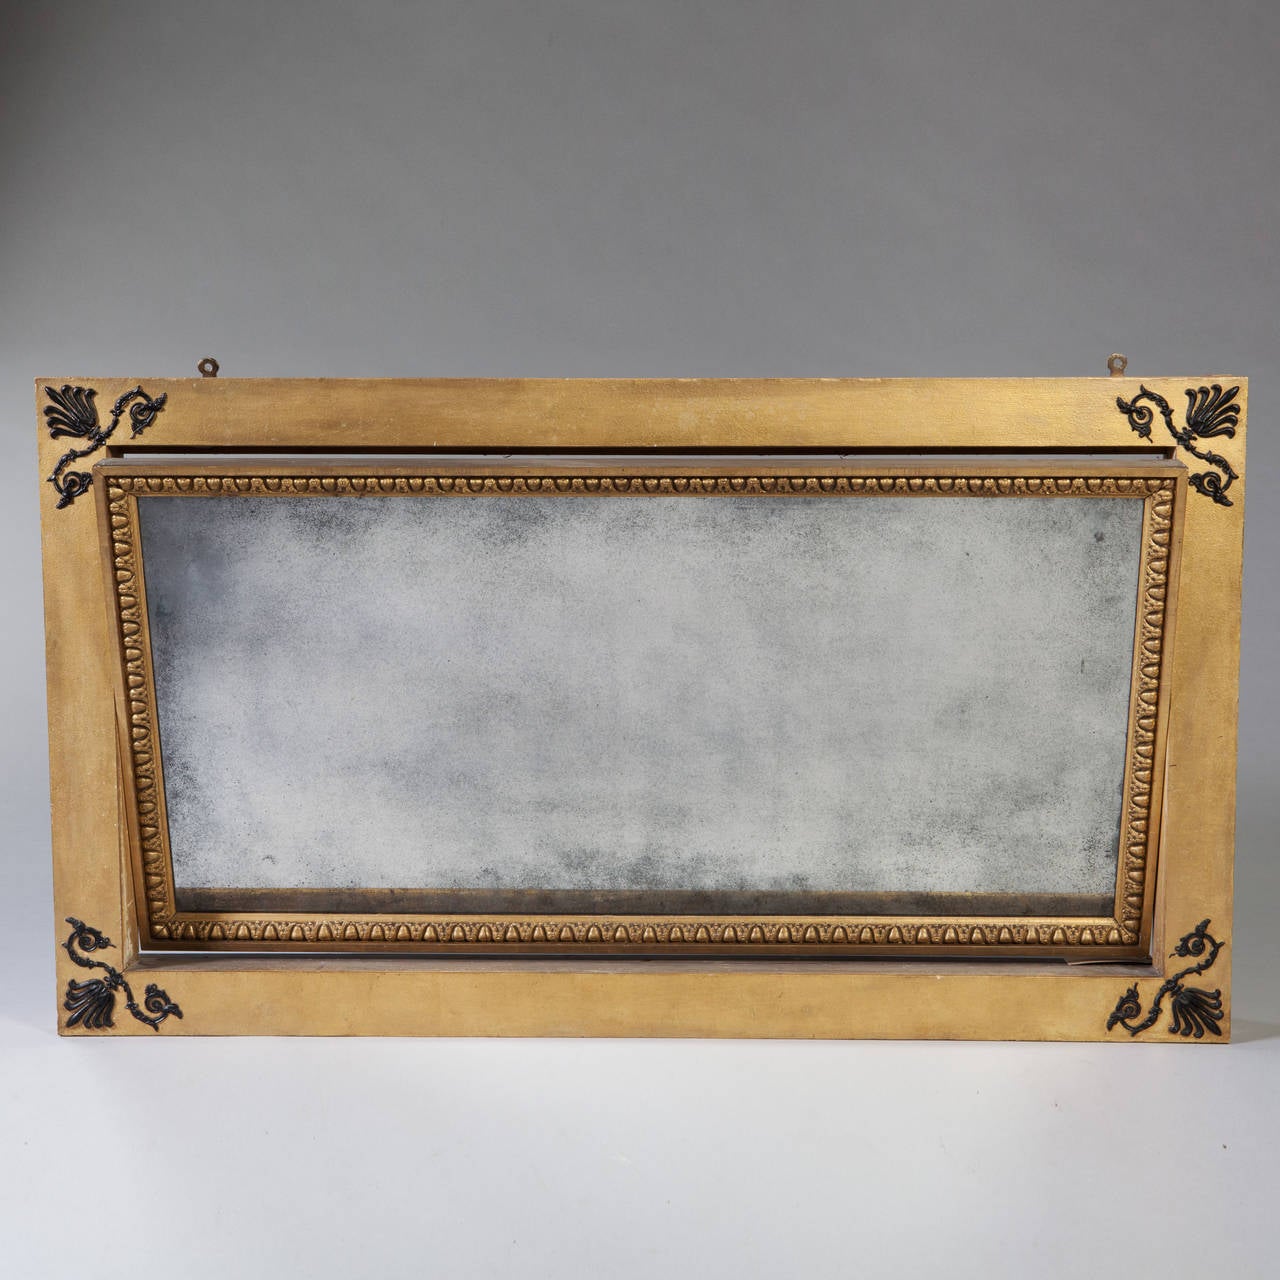 48 inch English Regency Gold Overmantel Mirror In Excellent Condition In London, by appointment only